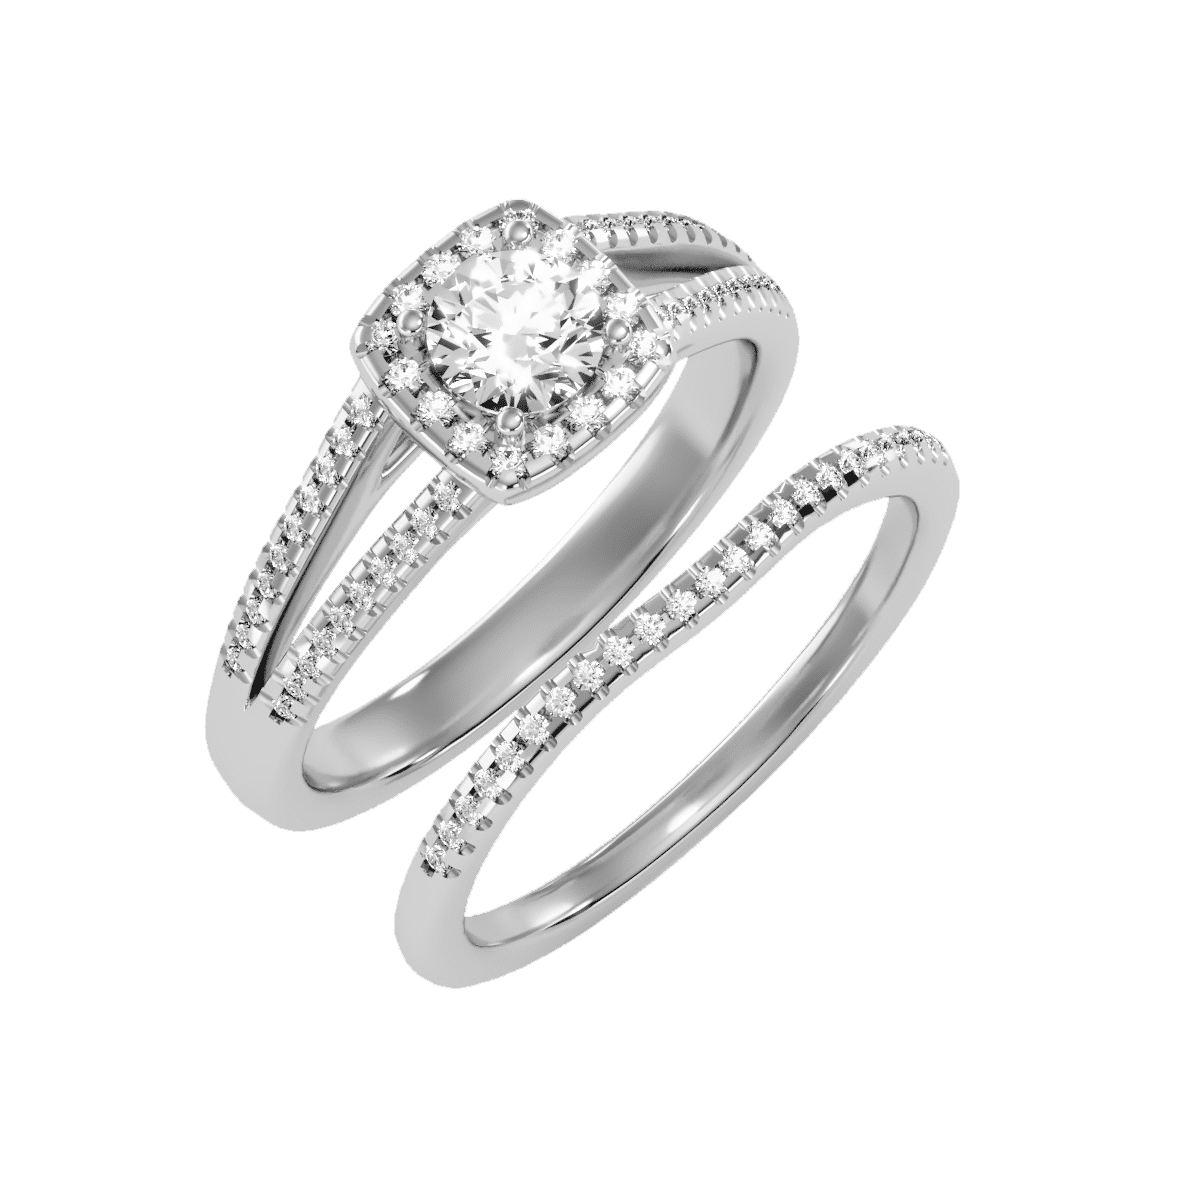 Sqare Halo Engagement Ring With Matching Wedding Band